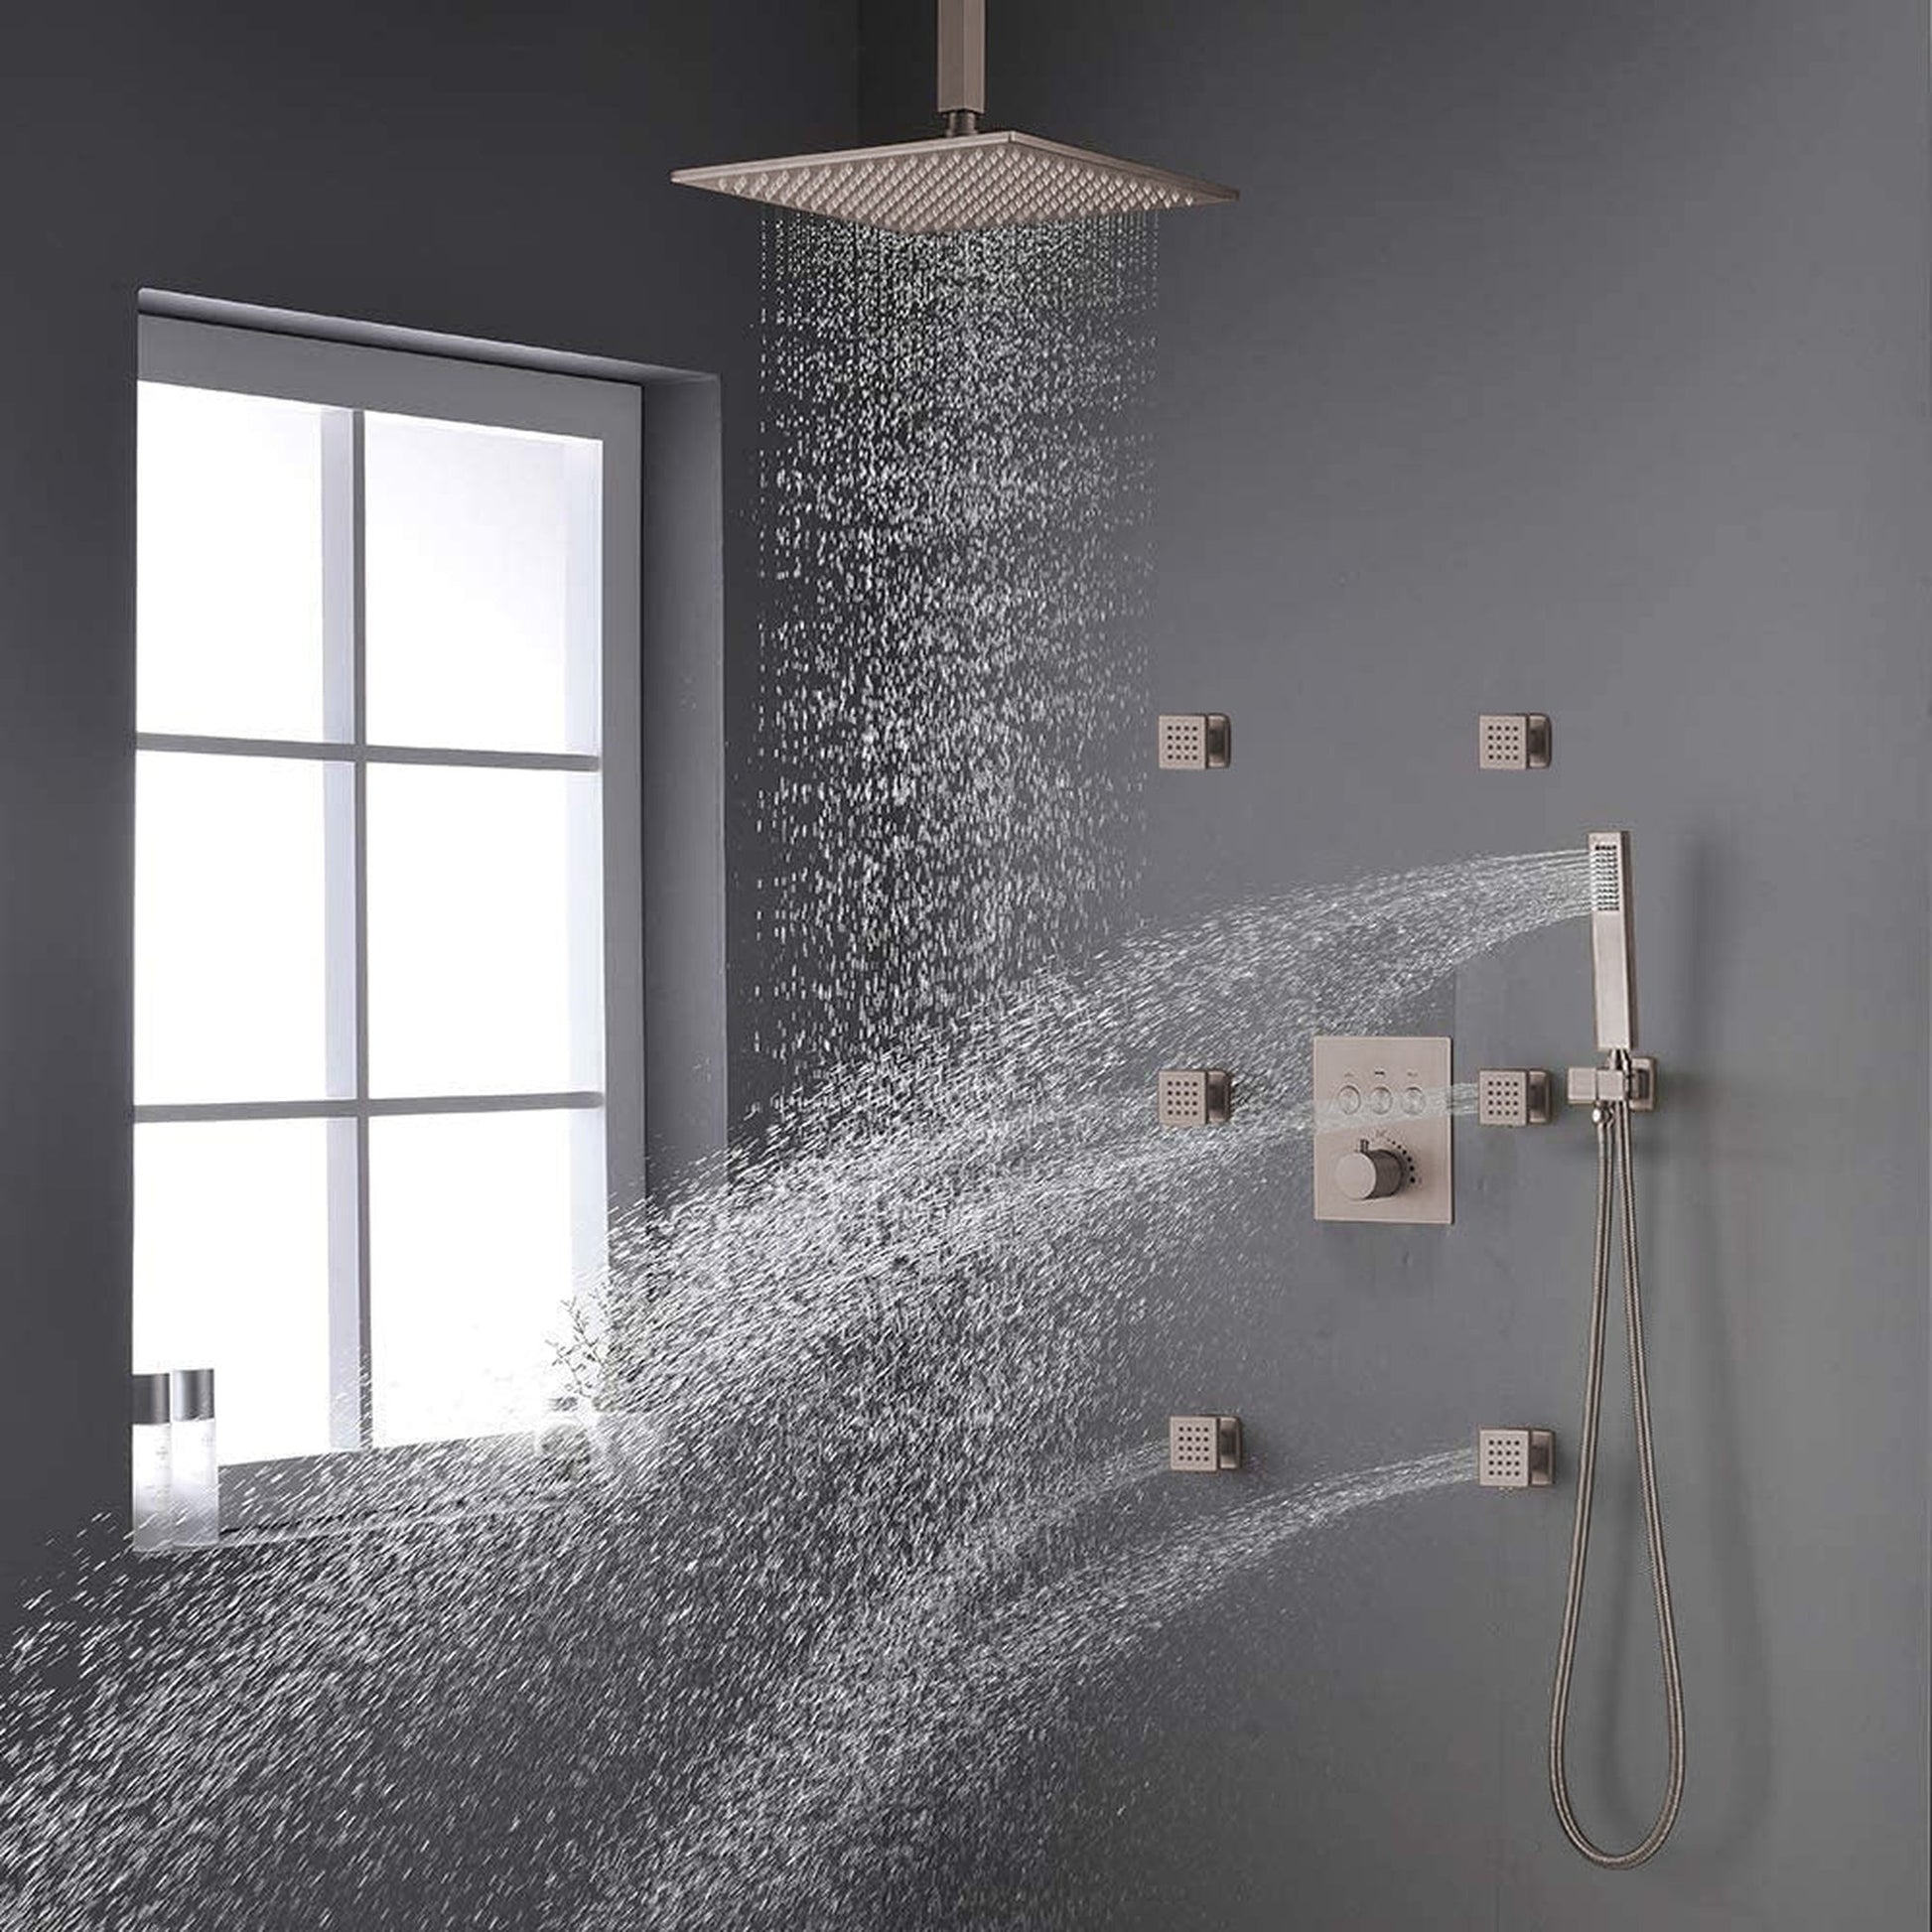 Fontana 10" Brushed Nickel Square Ceiling Mounted Rainfall Thermostat Mixer Shower System With 4-Jet Sprays and Hand Shower